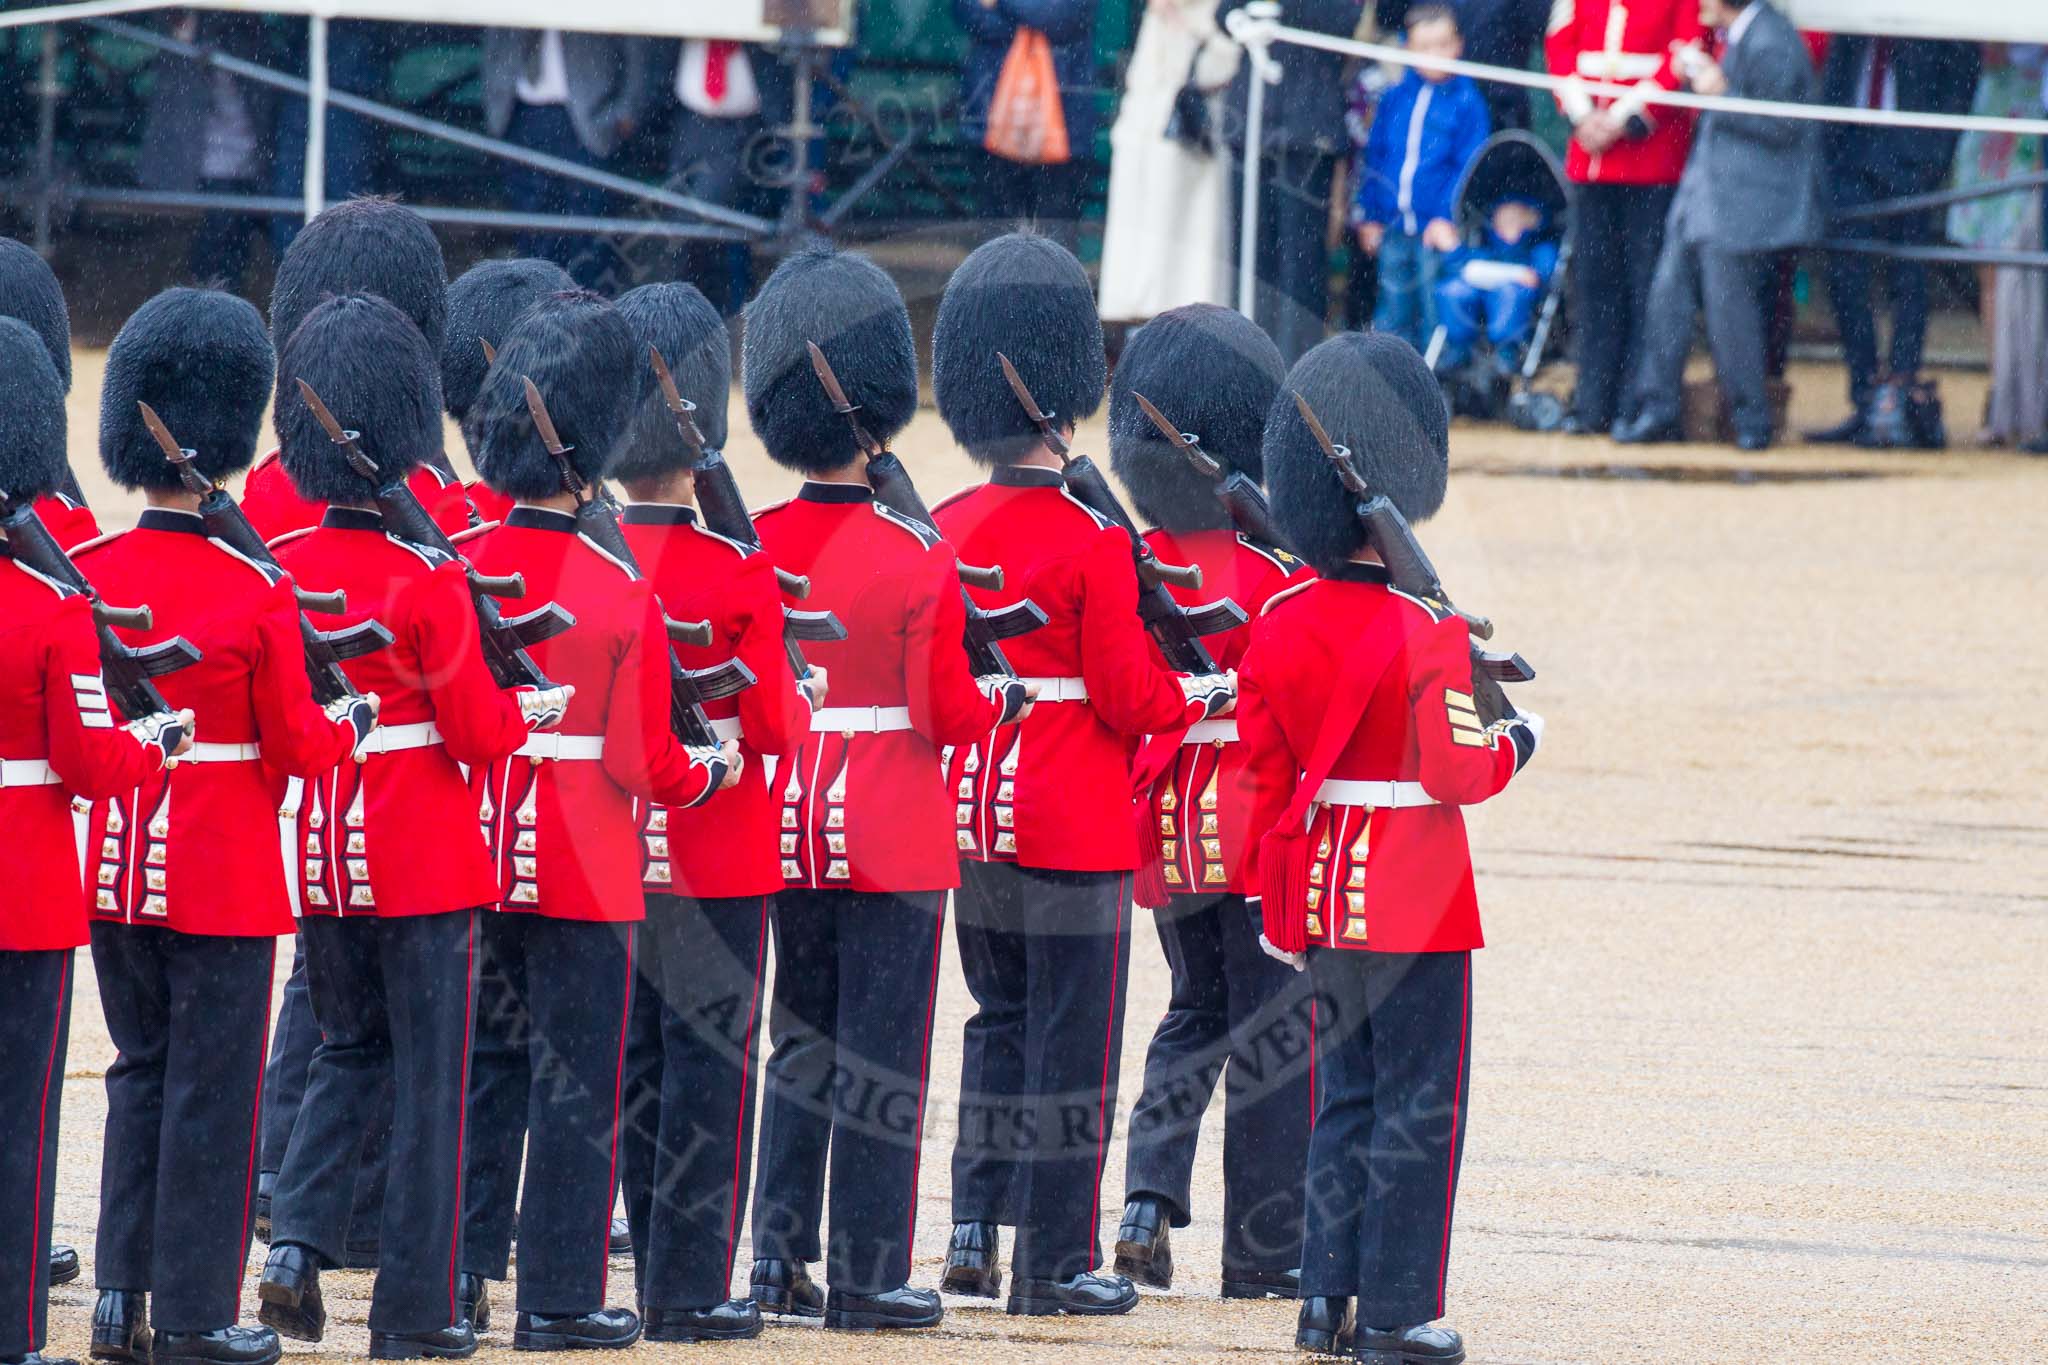 The Colonel's Review 2014.
Horse Guards Parade, Westminster,
London,

United Kingdom,
on 07 June 2014 at 11:21, image #413